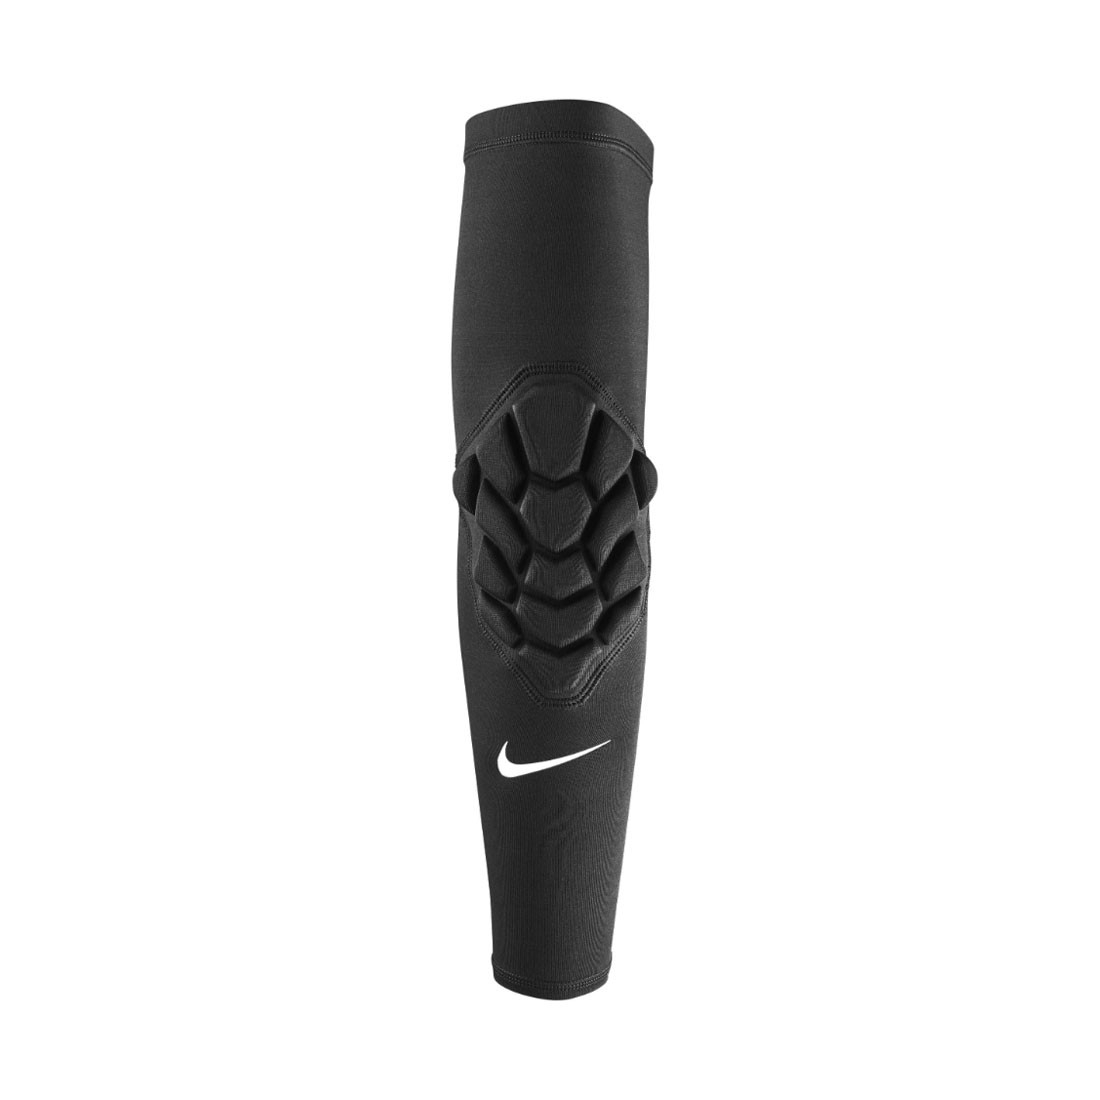 https://www.epsports.fr/pub/media/catalog/product/cache/0a4fb221db9c1177ccf39e1a12fc6524/h/y/hyperstrong_core_padded_elbow_sleeve_black.jpg